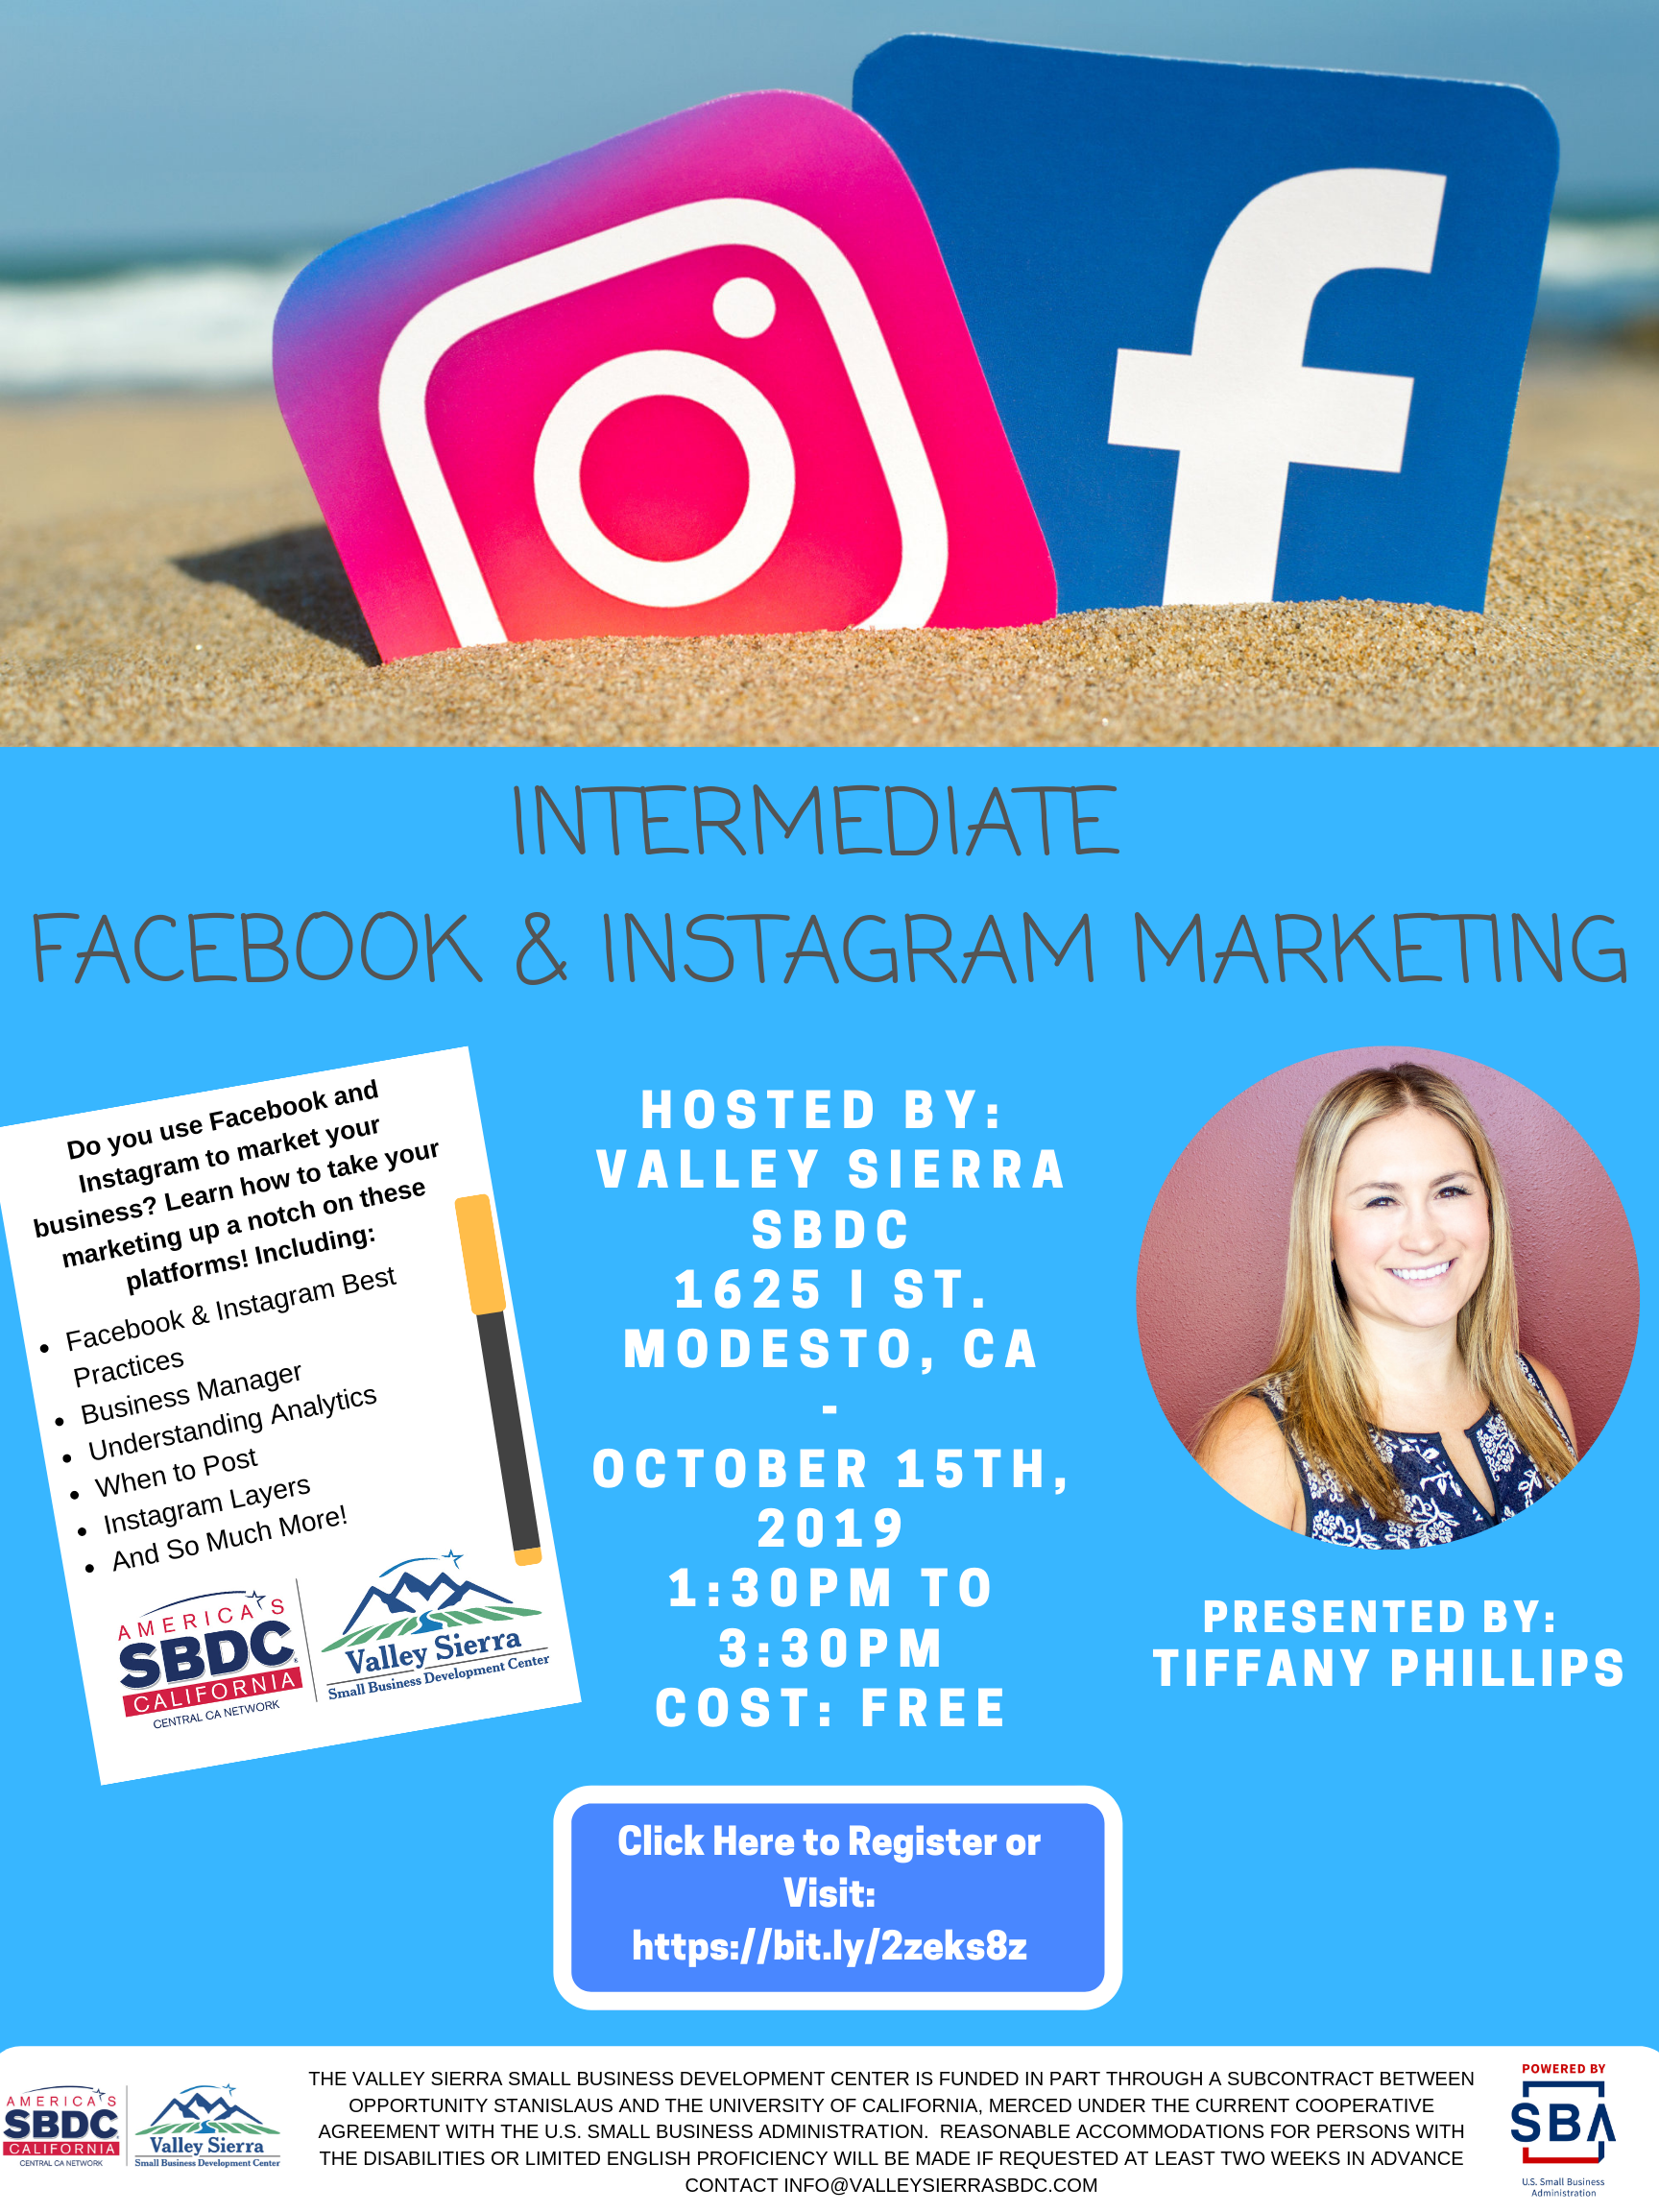 Event Flyer, Hosted by Valley Sierra SBDC, 1625 I St. Modesto, CA, October 15th, 2019, 1:30pm to 3:30pm, Cost is Free. Learn how to take your marketing up a notch on these platforms! Including: Facebook & Instagram Best Practices, Business Manager, Understanding Analytics, When to Post, Instagram Layers And So Much More!